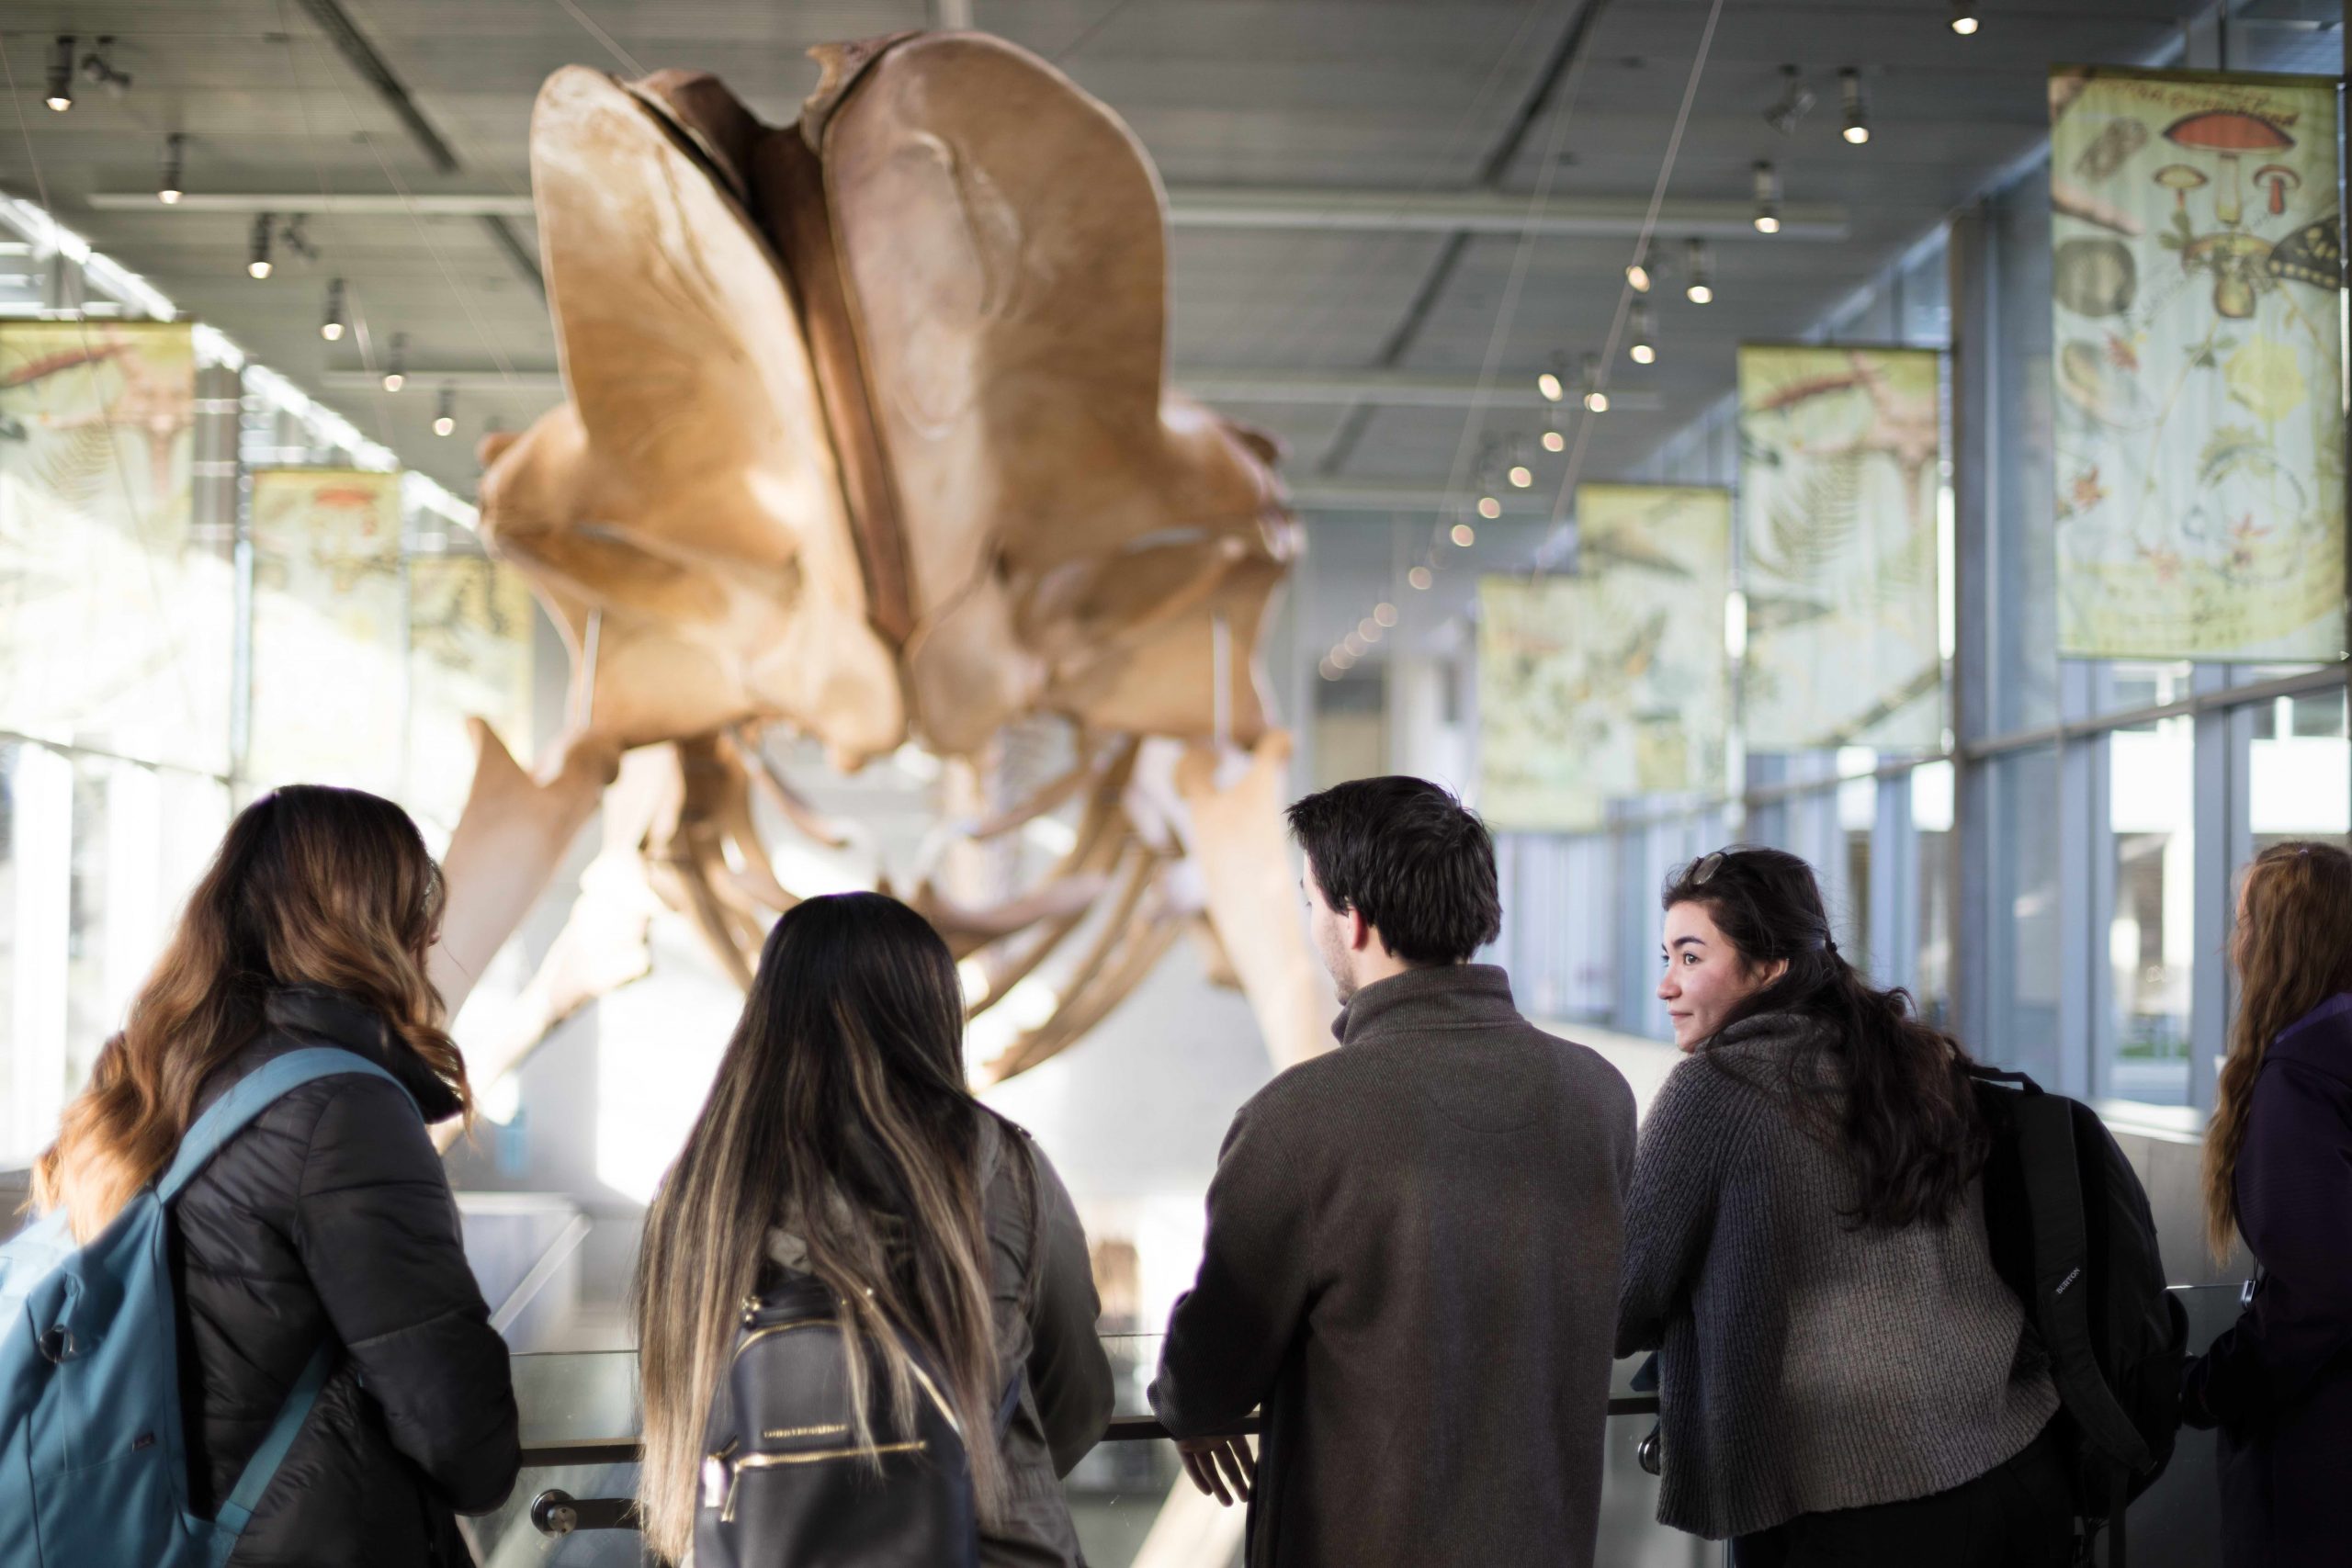 Five young adult museum visitors, one with her hear turned and four with their backs to the camera. They are standing looking at the blue whale skeleton head-on from the main lobby of the museum.